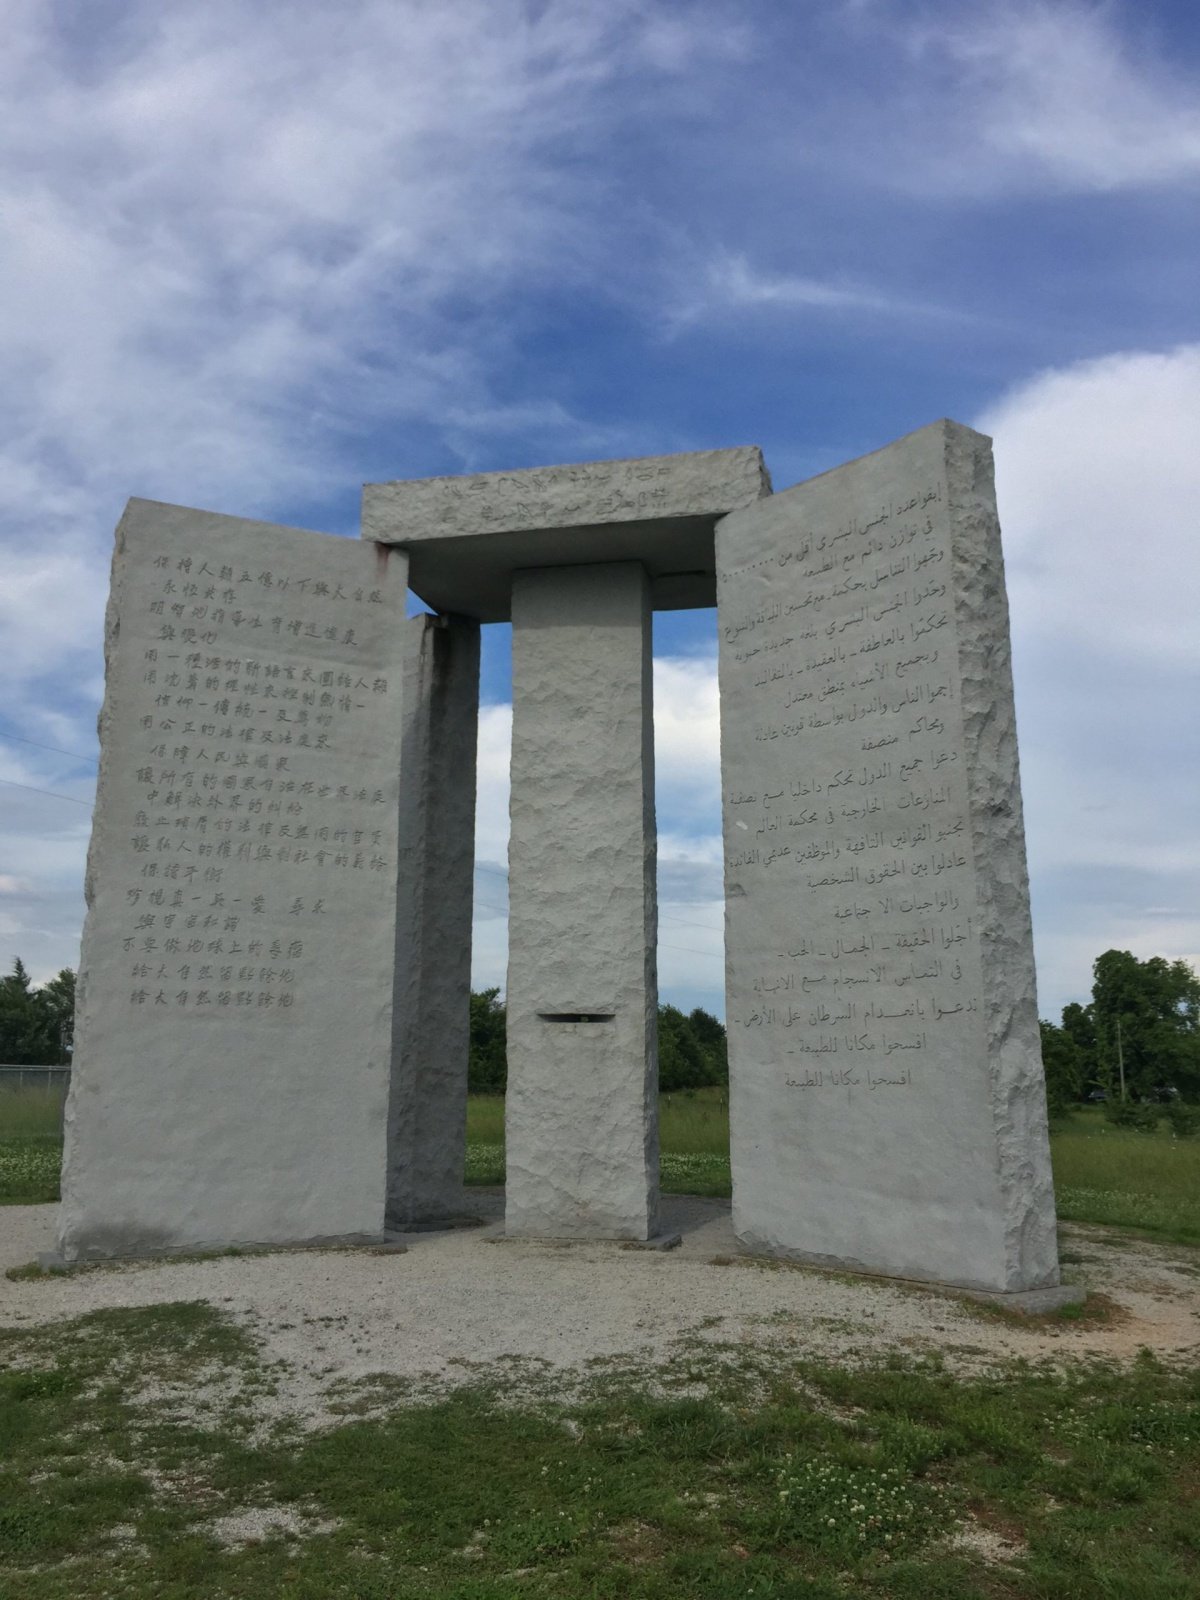 The Georgia Guidestone, an arrangement of granite monoliths with texts in various languages.